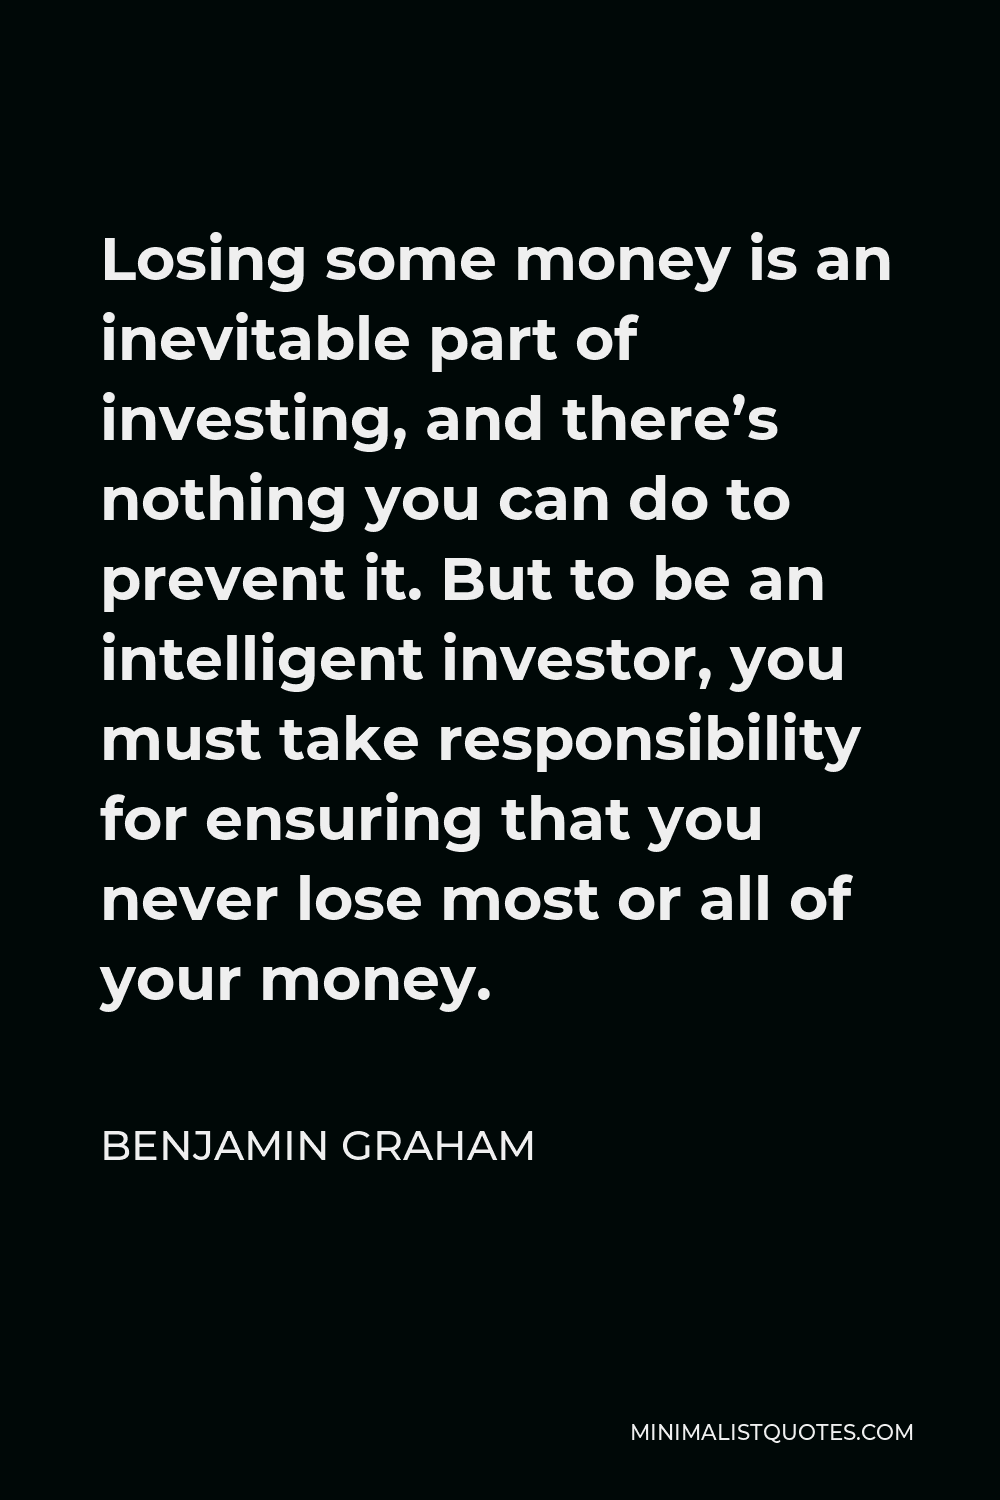 Benjamin Graham Quote - Losing some money is an inevitable part of investing, and there’s nothing you can do to prevent it. But to be an intelligent investor, you must take responsibility for ensuring that you never lose most or all of your money.